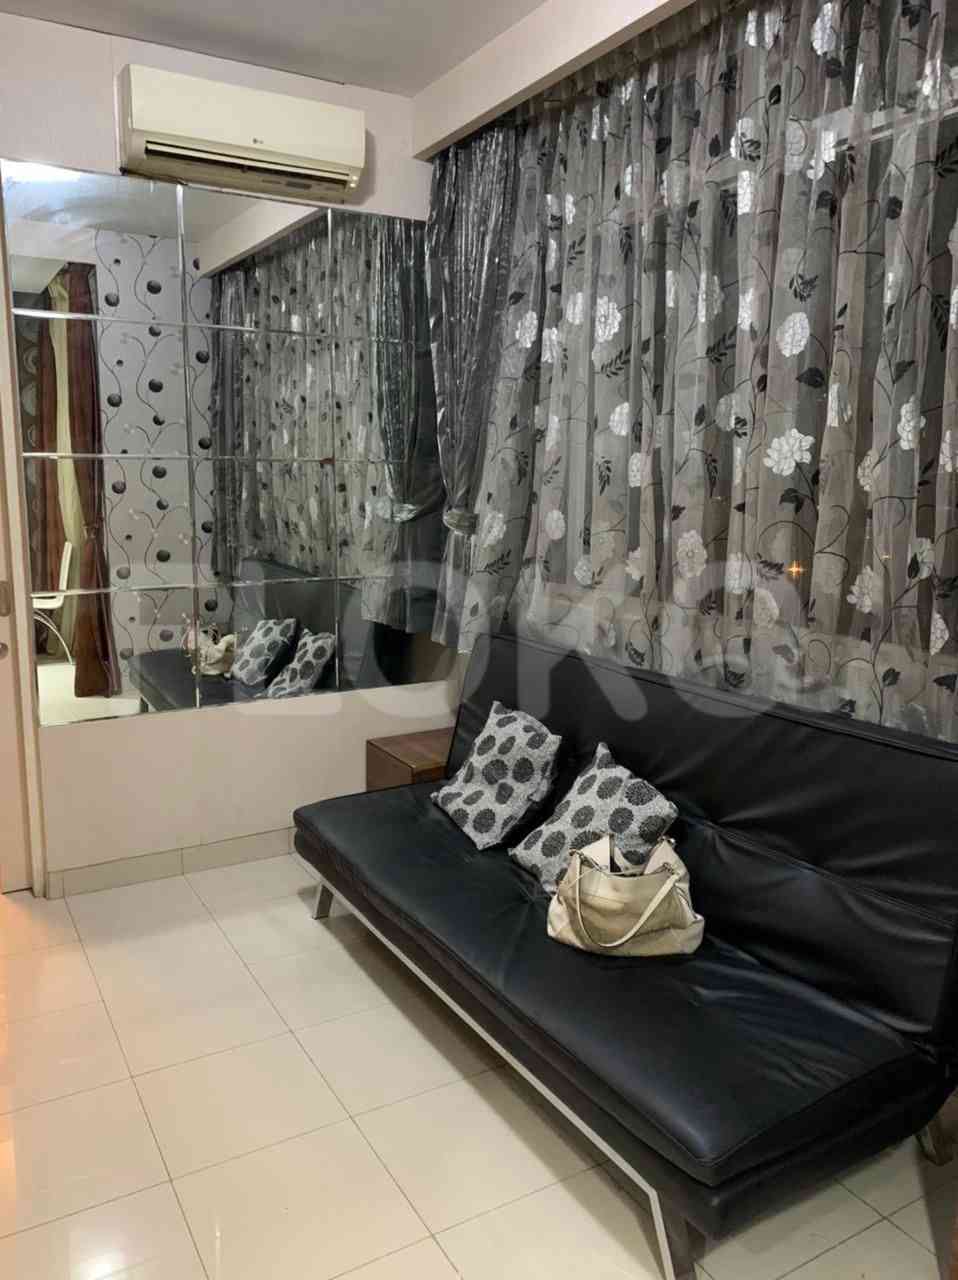 1 Bedroom on 6th Floor for Rent in Kuningan Place Apartment - fkued1 6